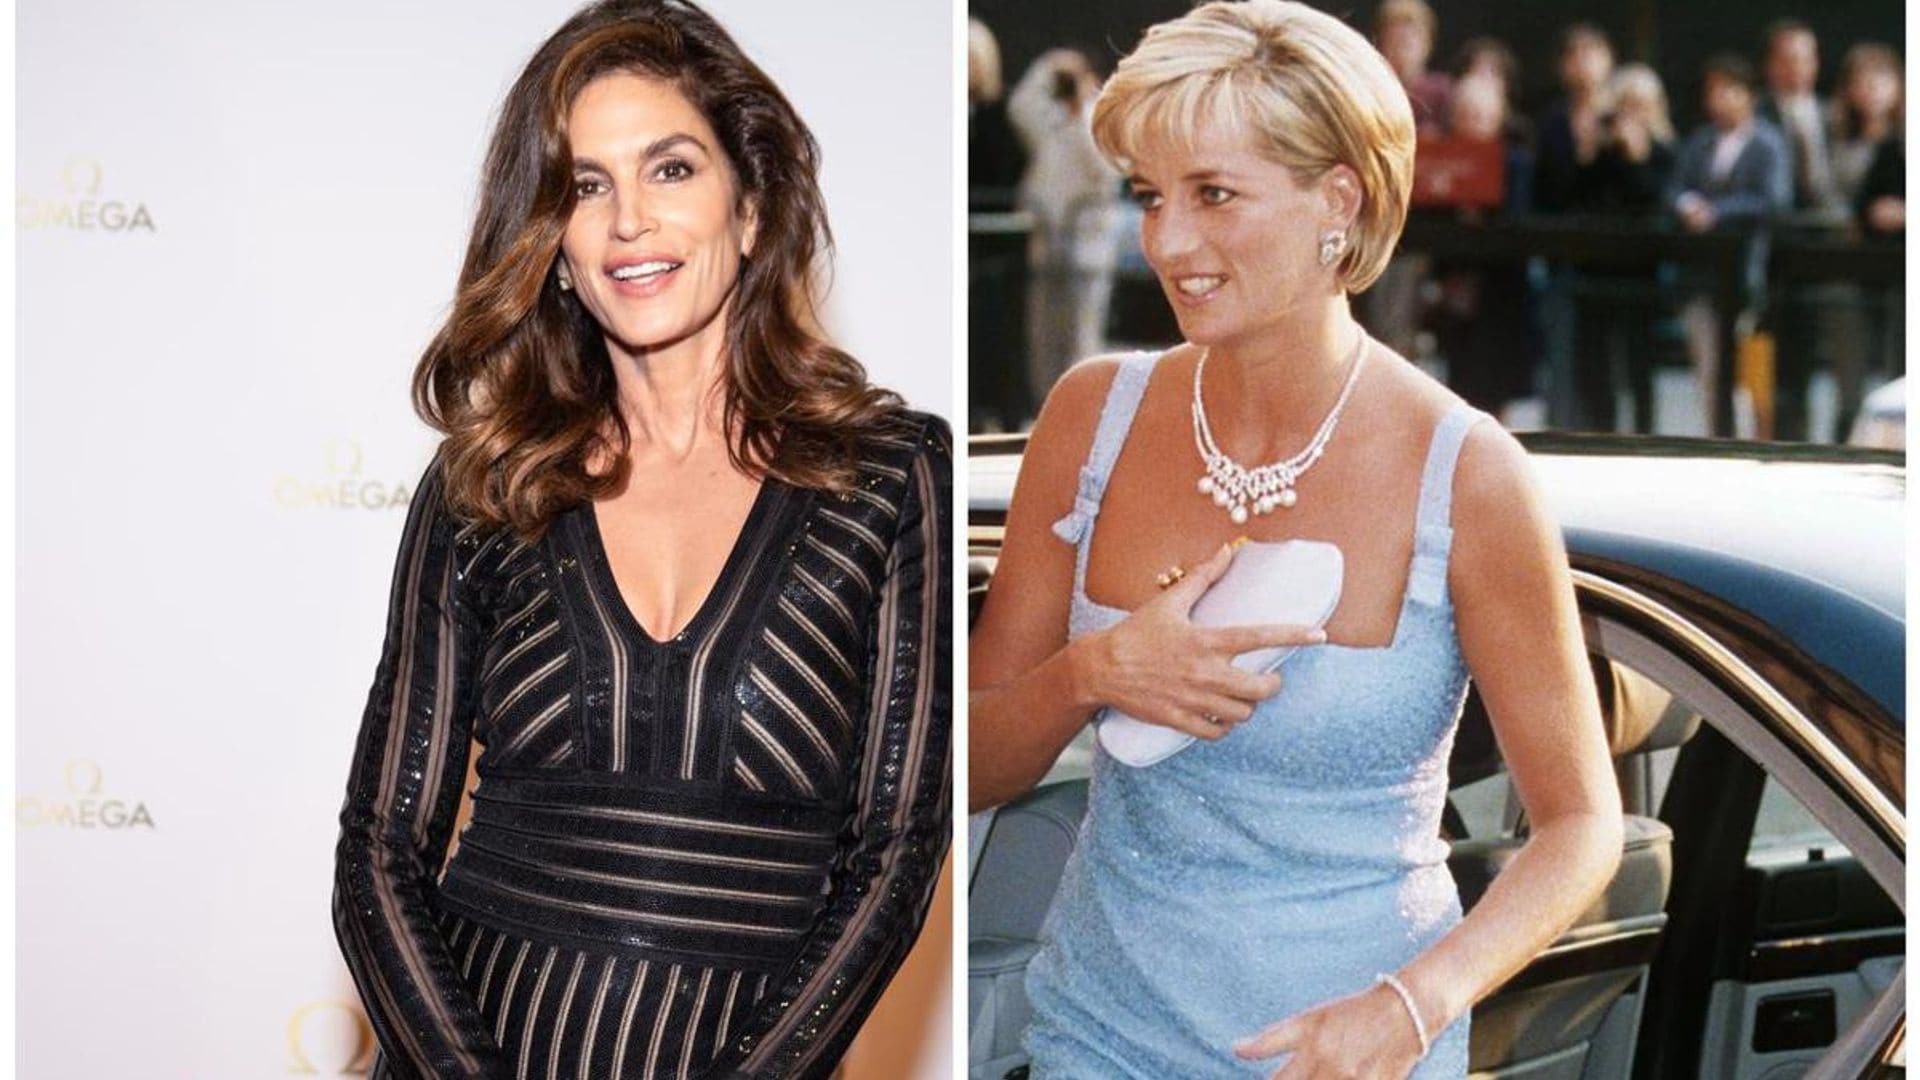 Cindy Crawford reflects on meeting Princess Diana after making a cameo in ‘The Crown’: See the photo